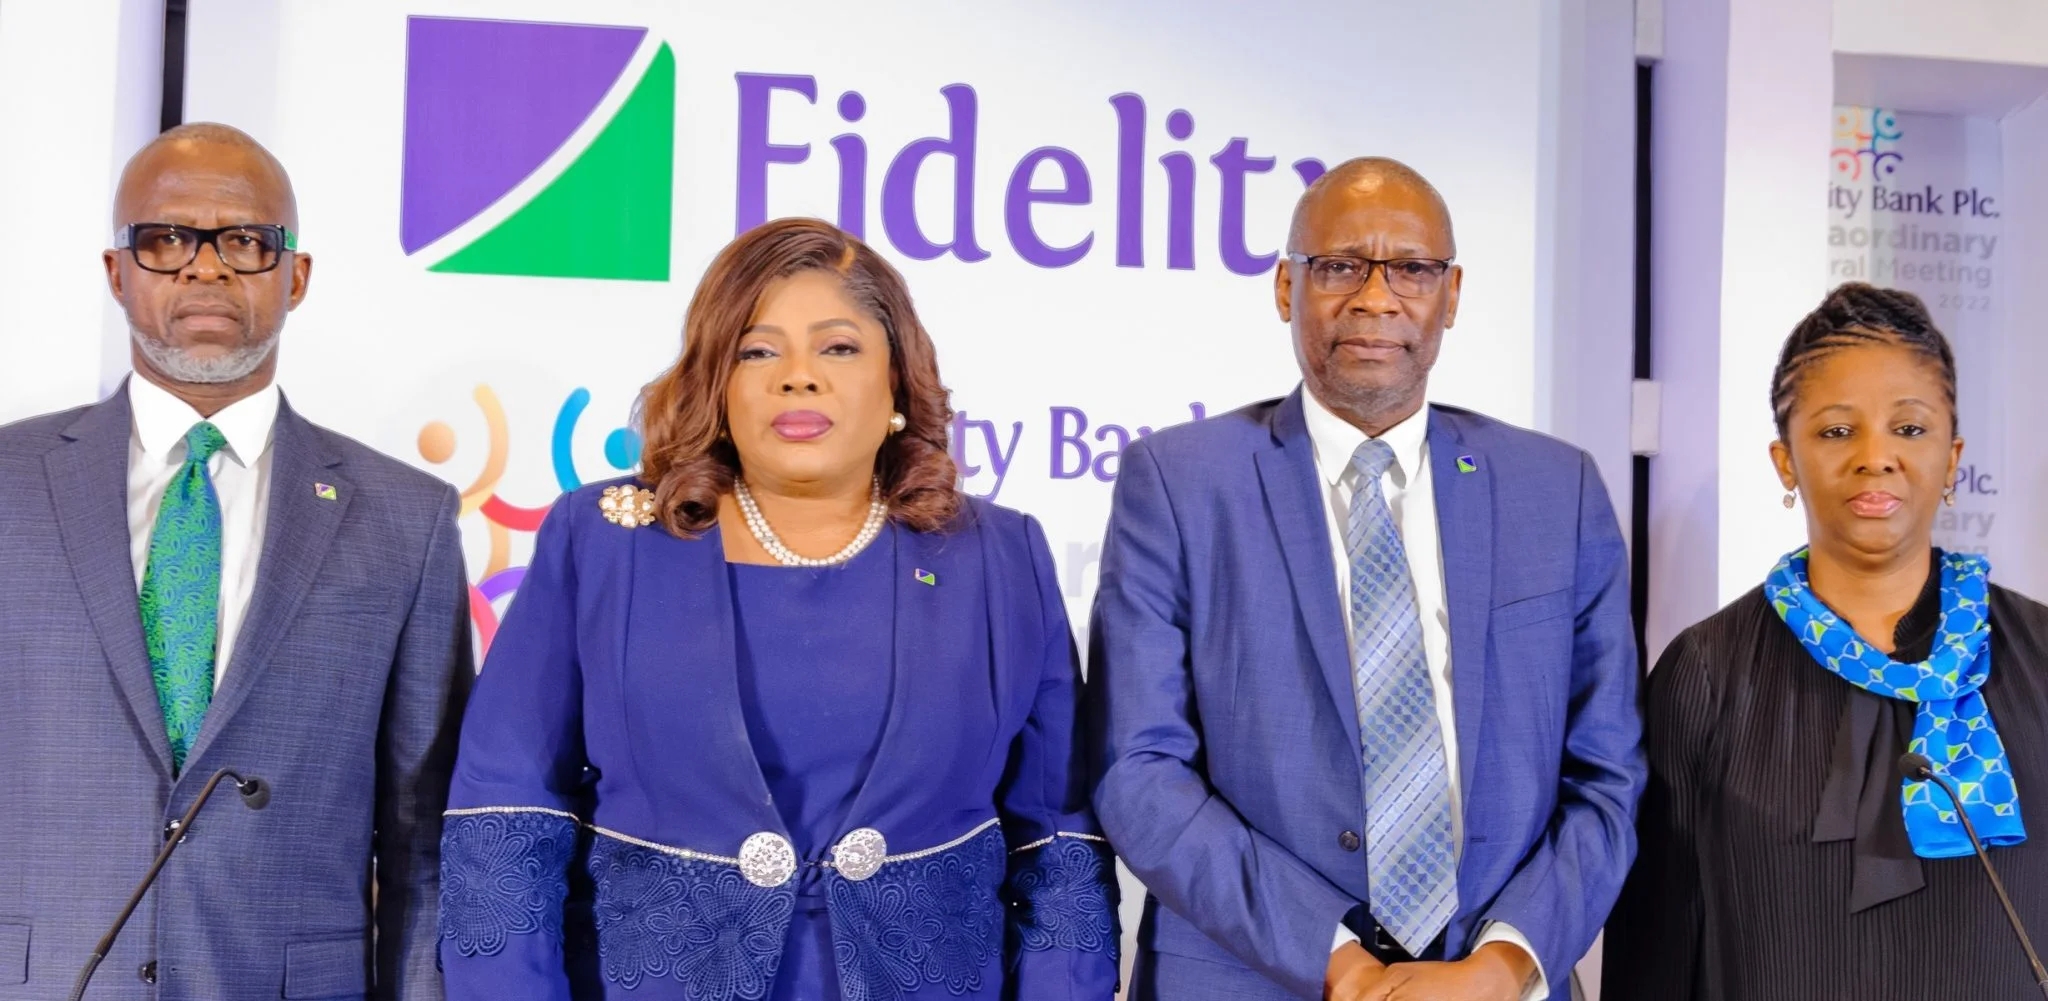 Fidelity Bank Plc has secured the approval of its shareholders to issue its unissued ordinary shares by way of the private placement. 